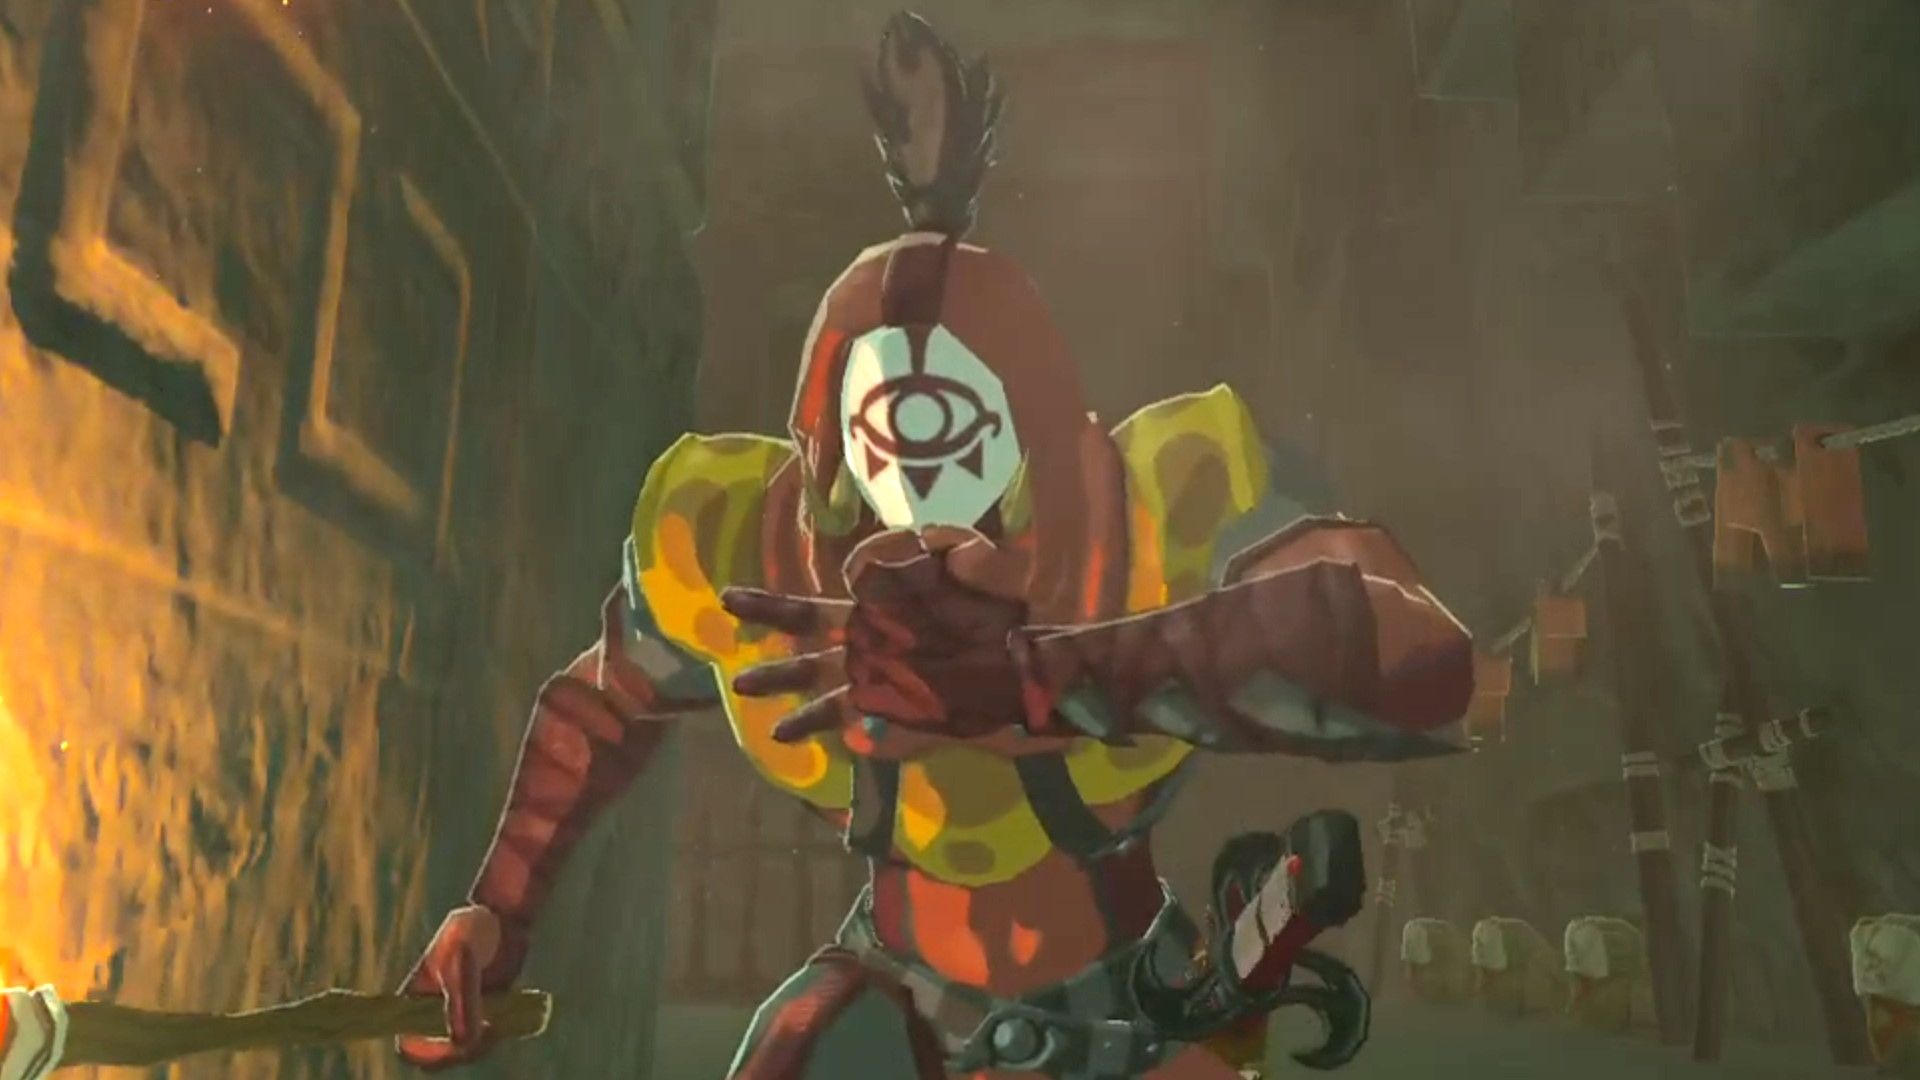 Zelda: Breath of the Wild player uses electricity glitch to build a better Yiga trap